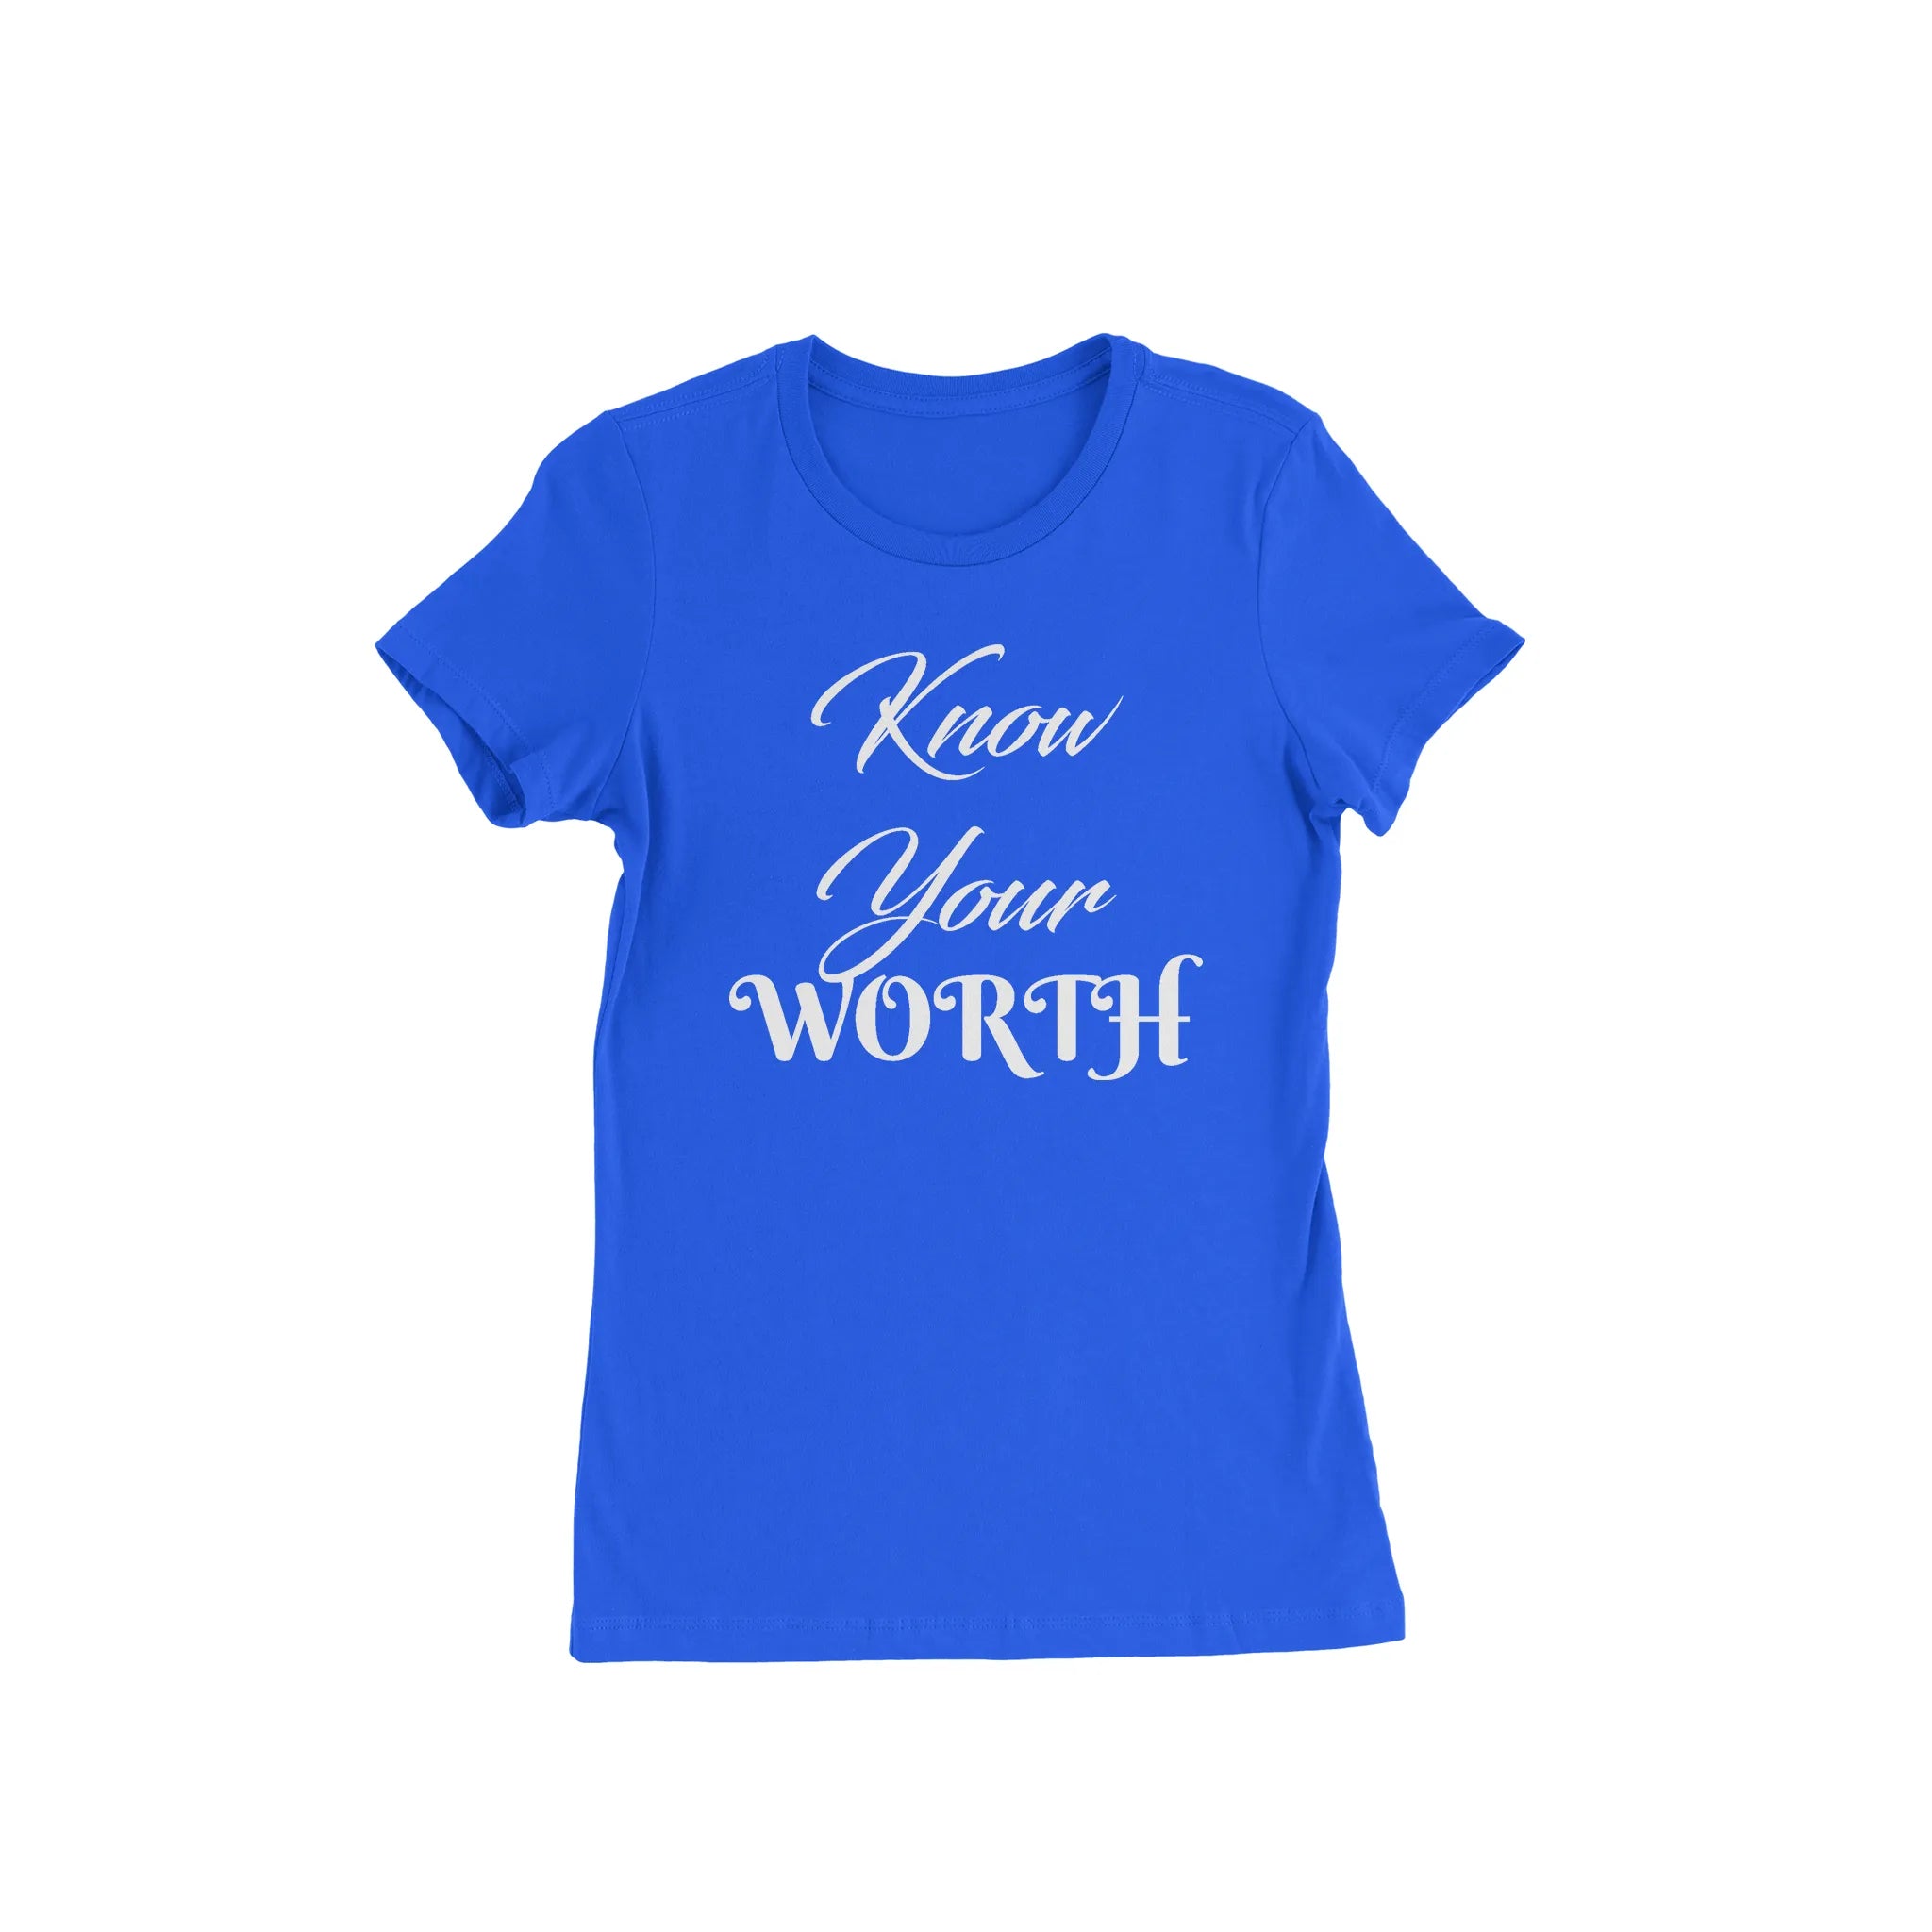 Know Your Worth Blue T - Shirt - Diva Starr Boutique